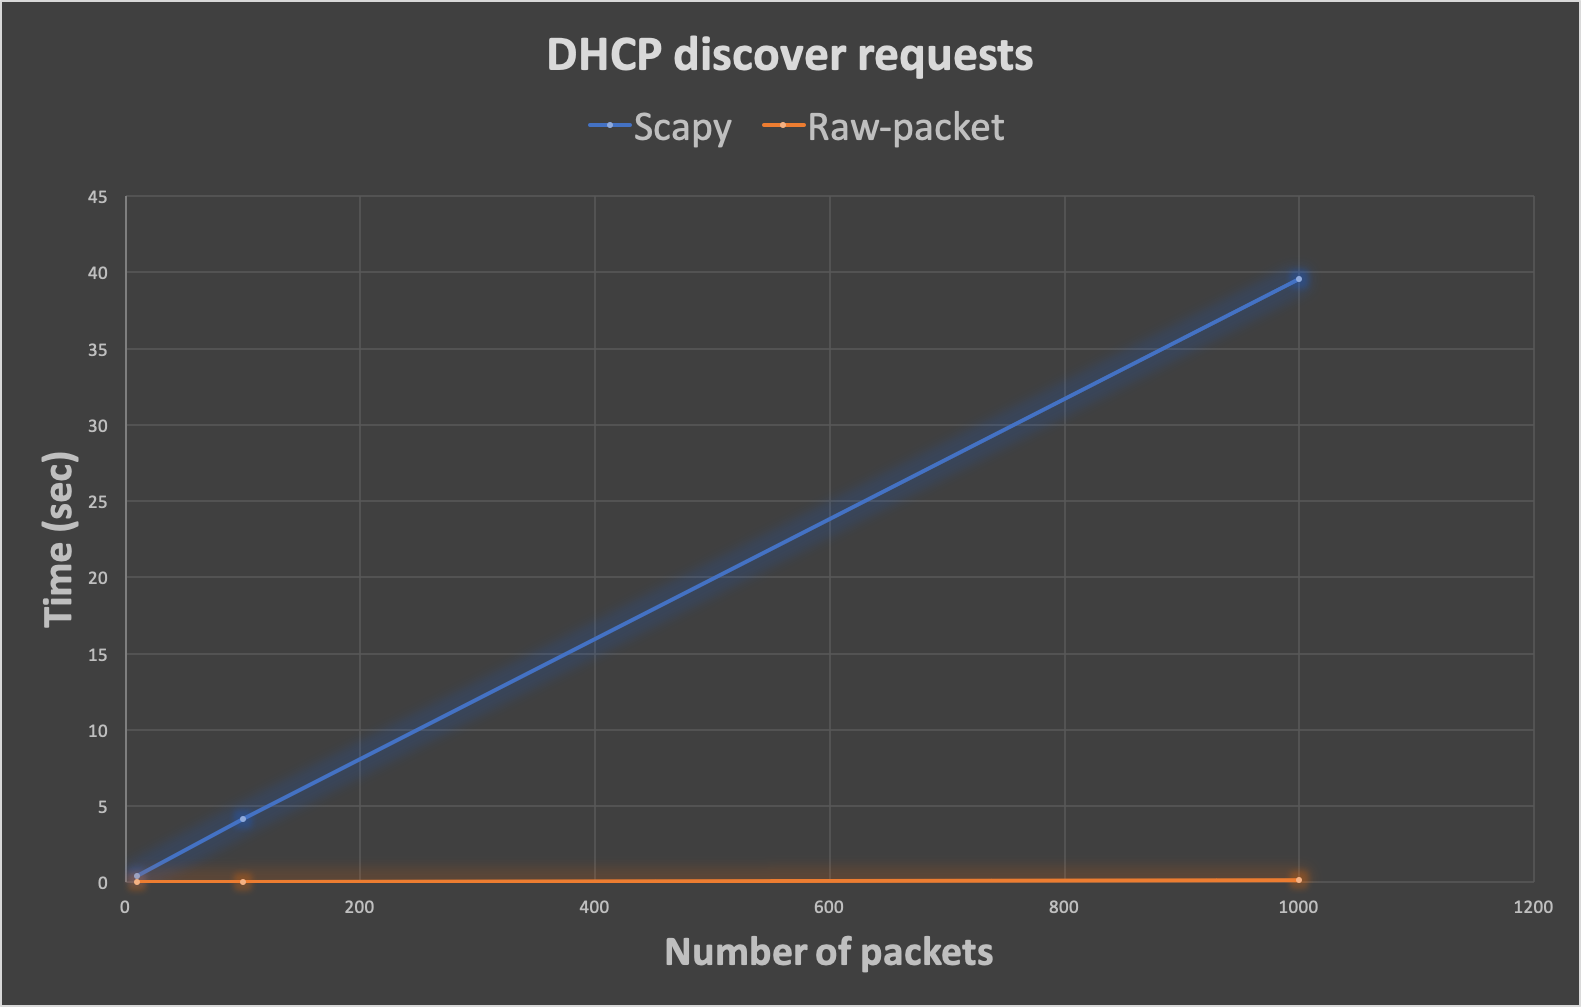 Scapy vs. Raw-packet DHCP discover requests